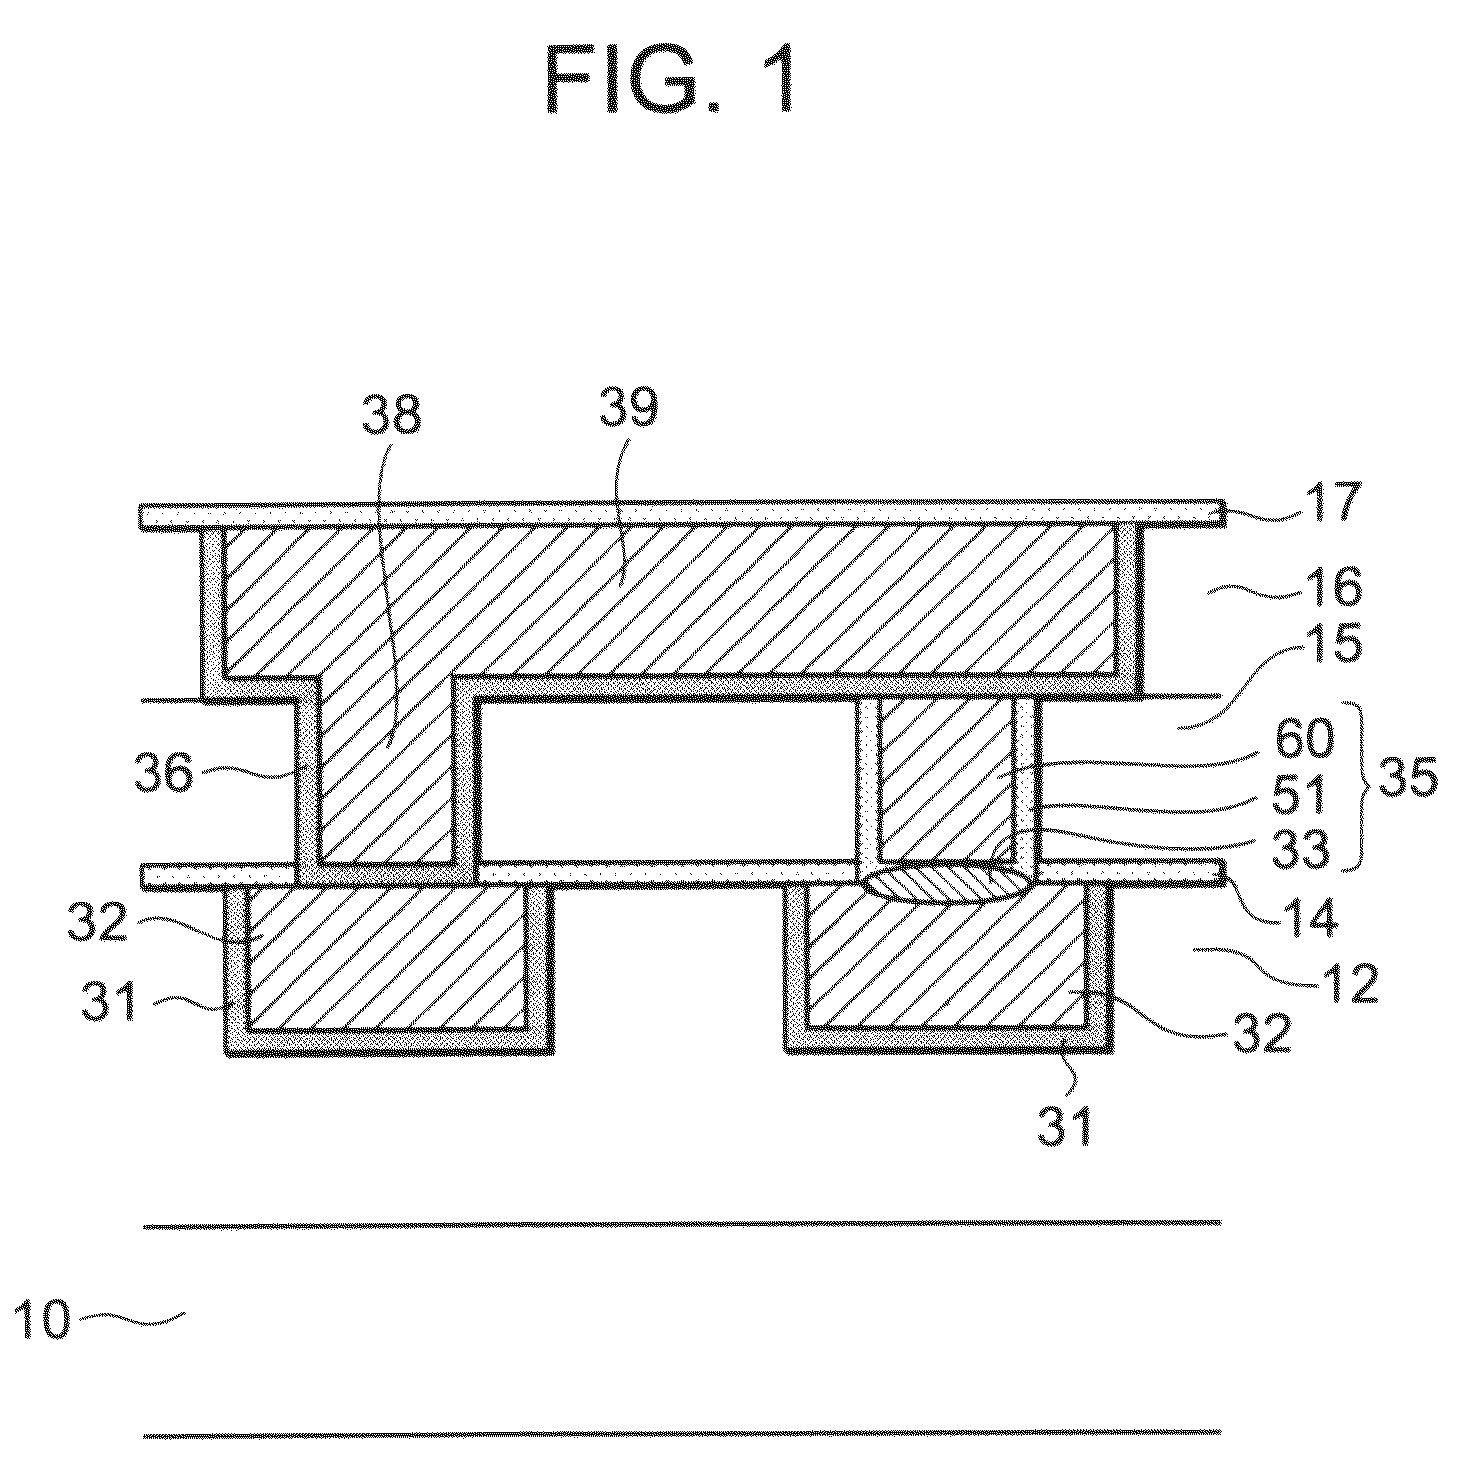 Semiconductor device and method of manufacturing semiconductor device including wiring via and switch via for connecting first and second wirings